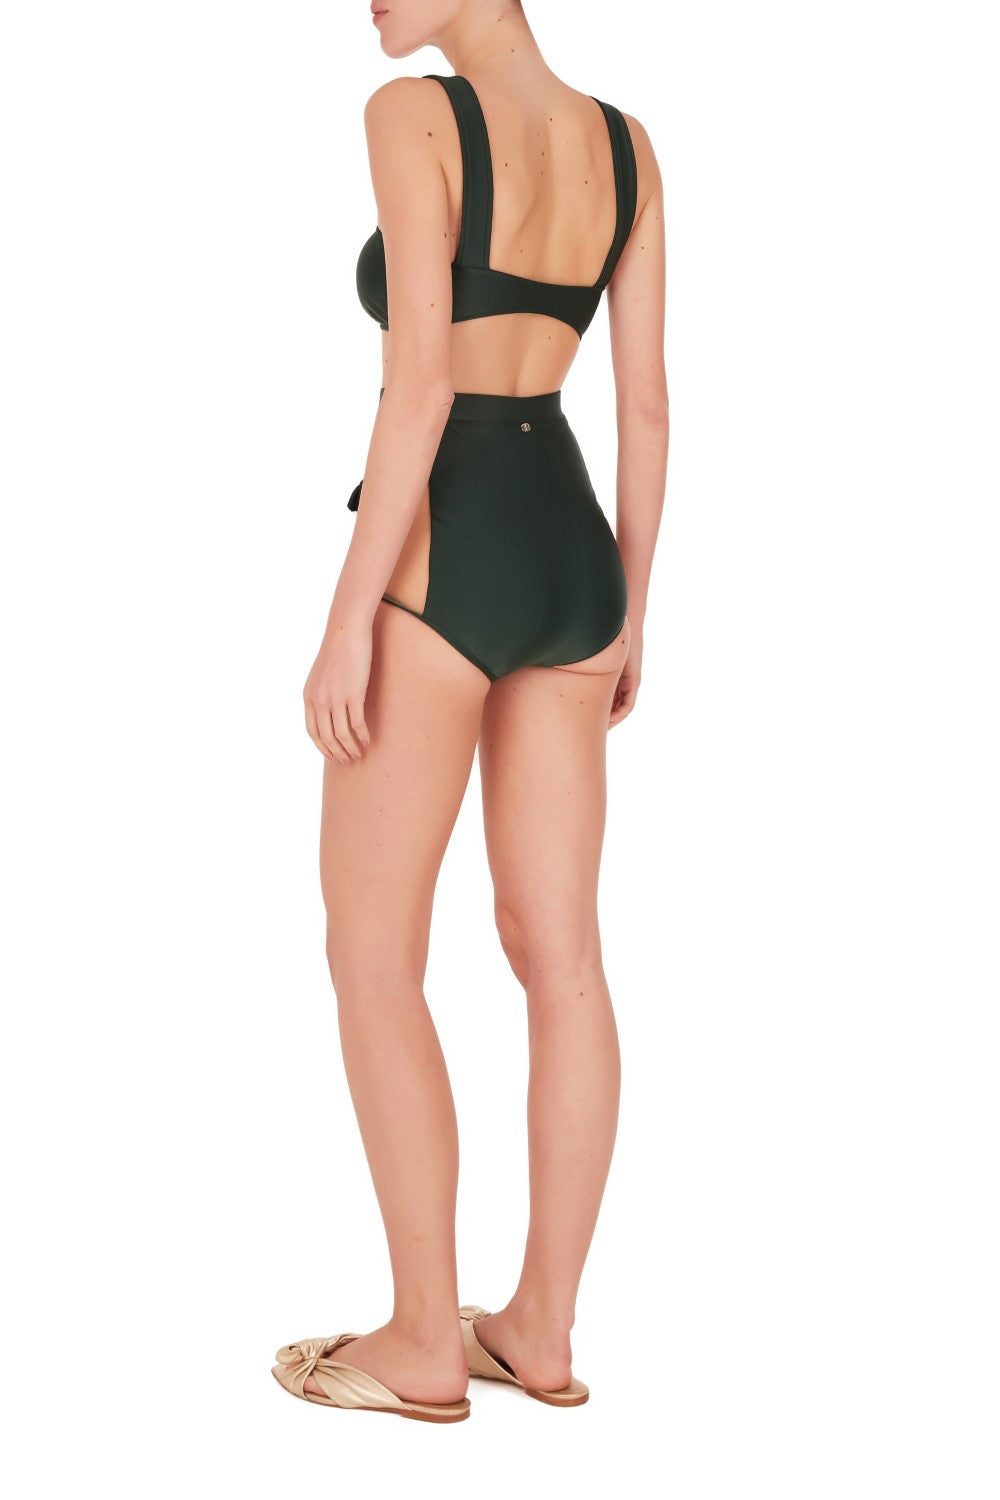 It’s the side cut-outs with tulle which gives this bikini an avantgarde appeal. Crafted from stretch fabric it has low-cut leg, wide straps and deColorative buttons